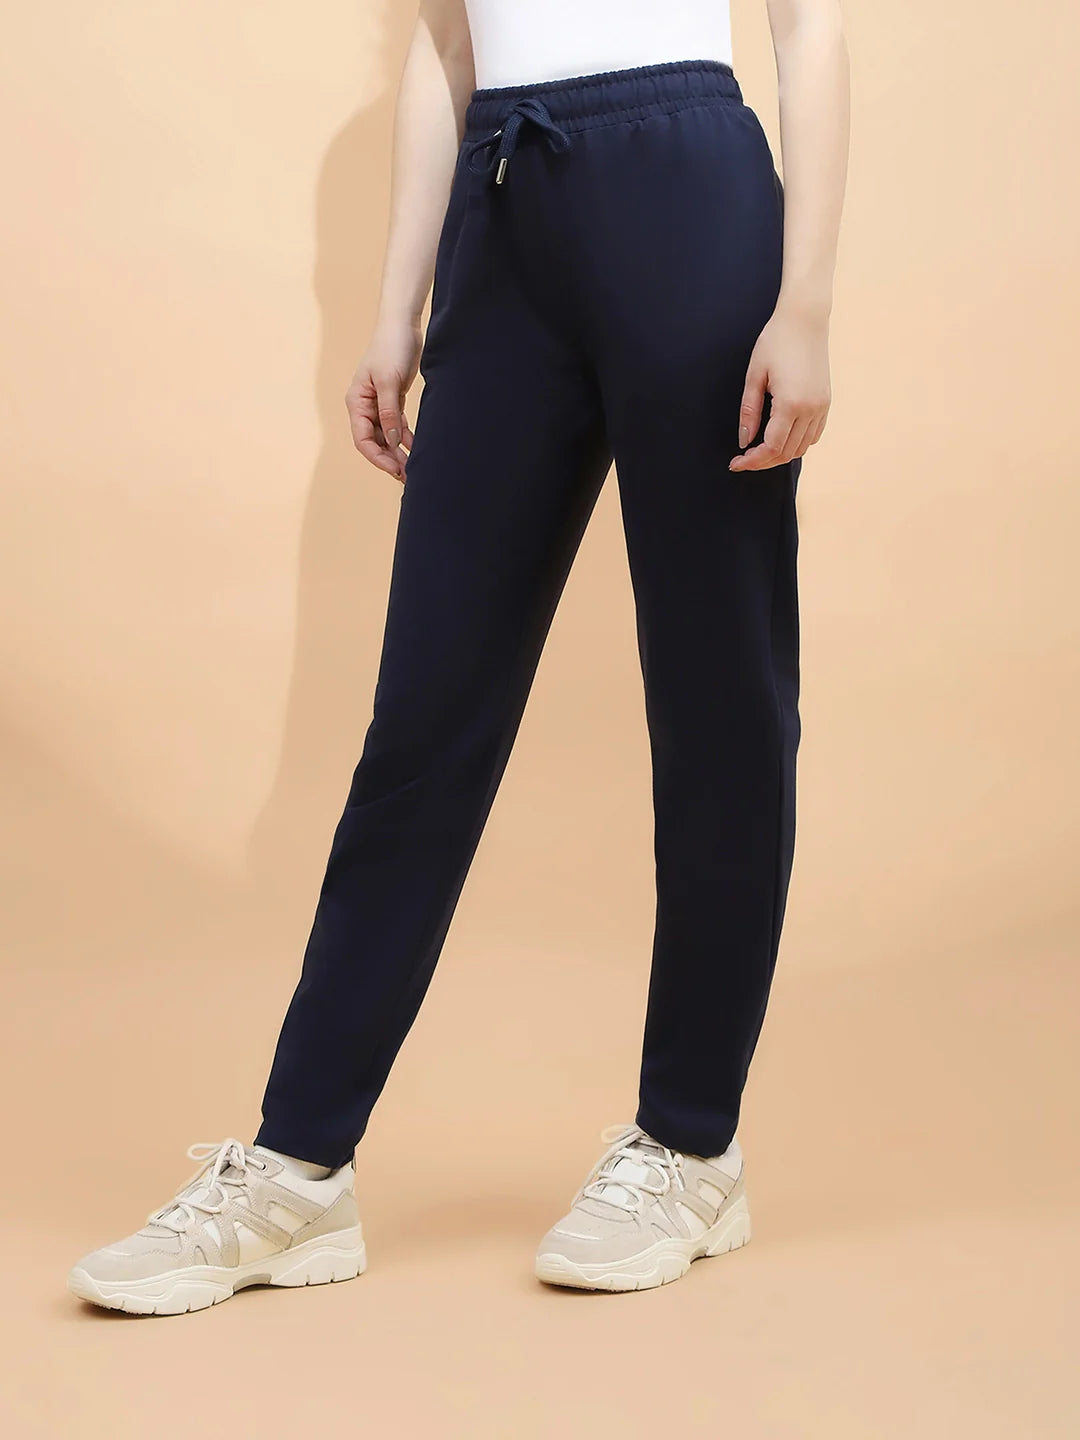 Navy Blue Polycotton Regular Fit Lower For Women